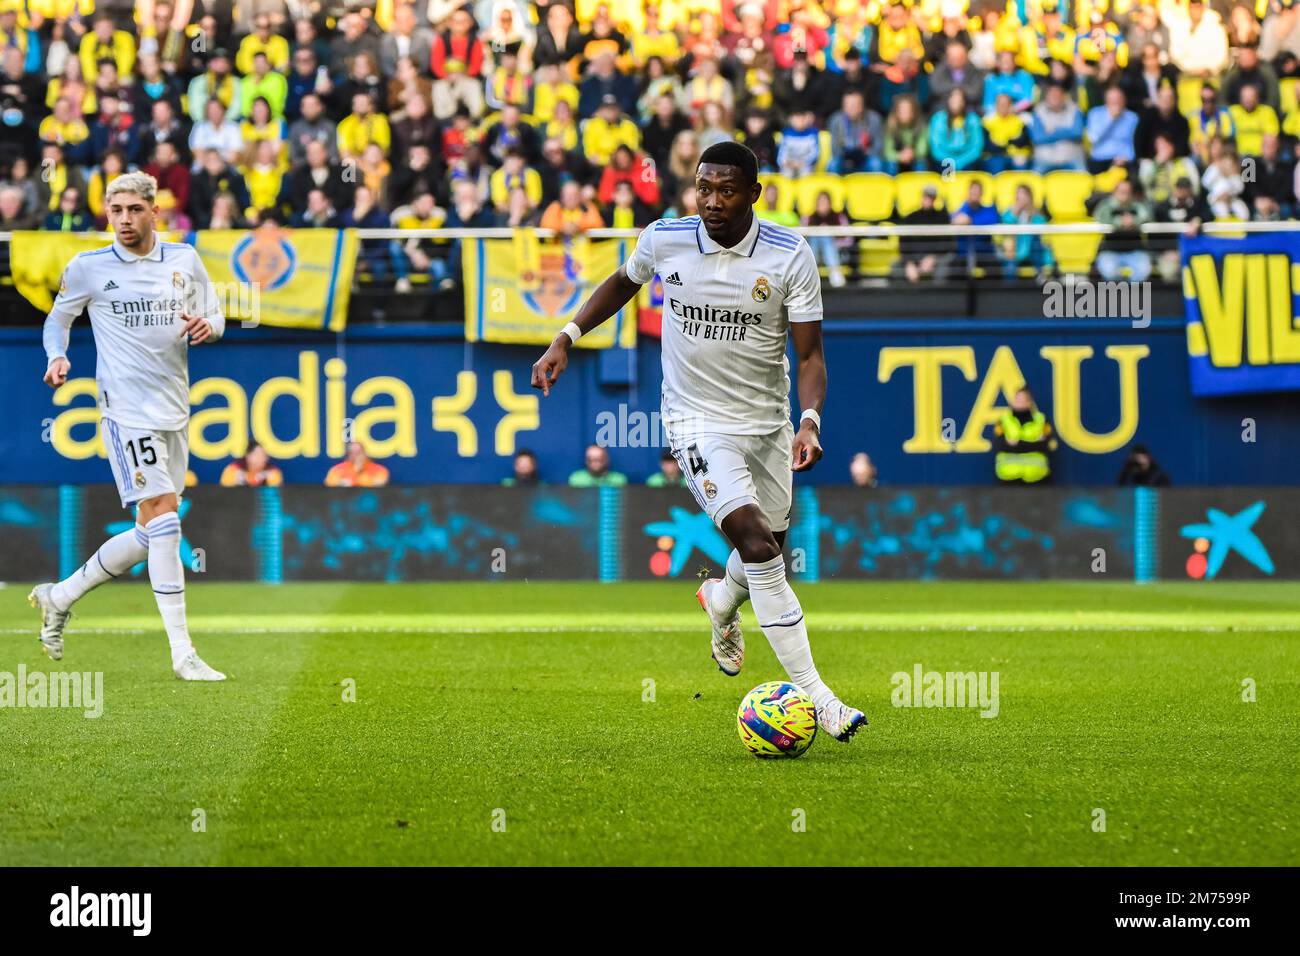 VILLARREAL, SPAIN - JANUARY 7: David Alaba of Real Madrid CF control the ball during the match between Villarreal CF and Real Madrid CF of La Liga Santander on January 7, 2023 at Estadi de la Ceramica in Villarreal, Spain. (Photo by Samuel Carreño/ PX Images) Credit: Px Images/Alamy Live News Stock Photo